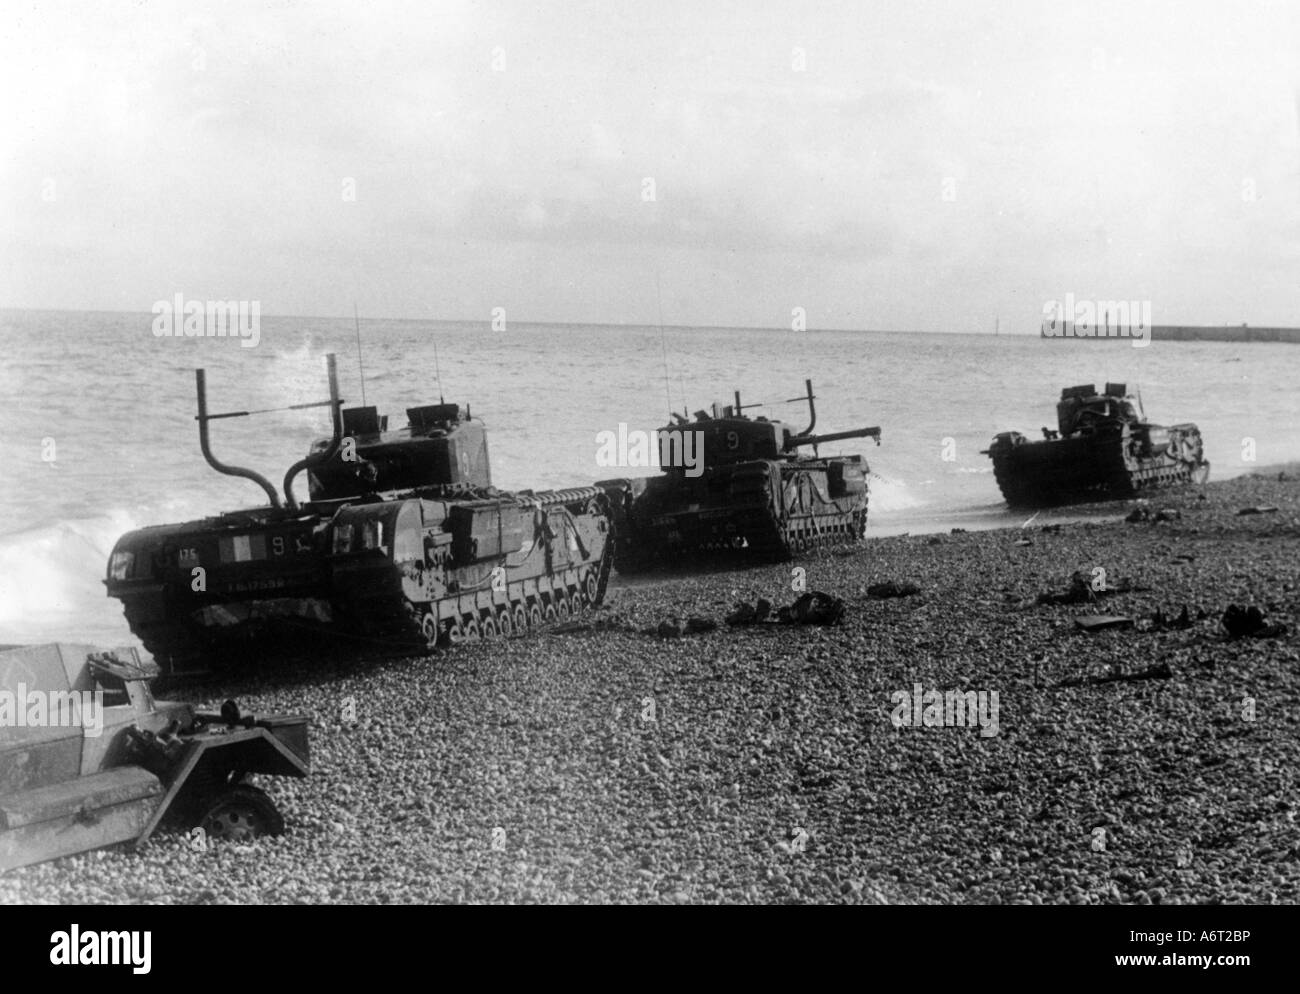 events, Second World War / WWII, France, Dieppe, 19.8.1942, destoyed 'Churchill' tanks of the 14th Canadian Army Tank Regiment (The Calgary Regiment) on the beach, Operation 'Jubilee', landing, raid, 2nd Canadian Division, Canadians, 20th century, , Stock Photo